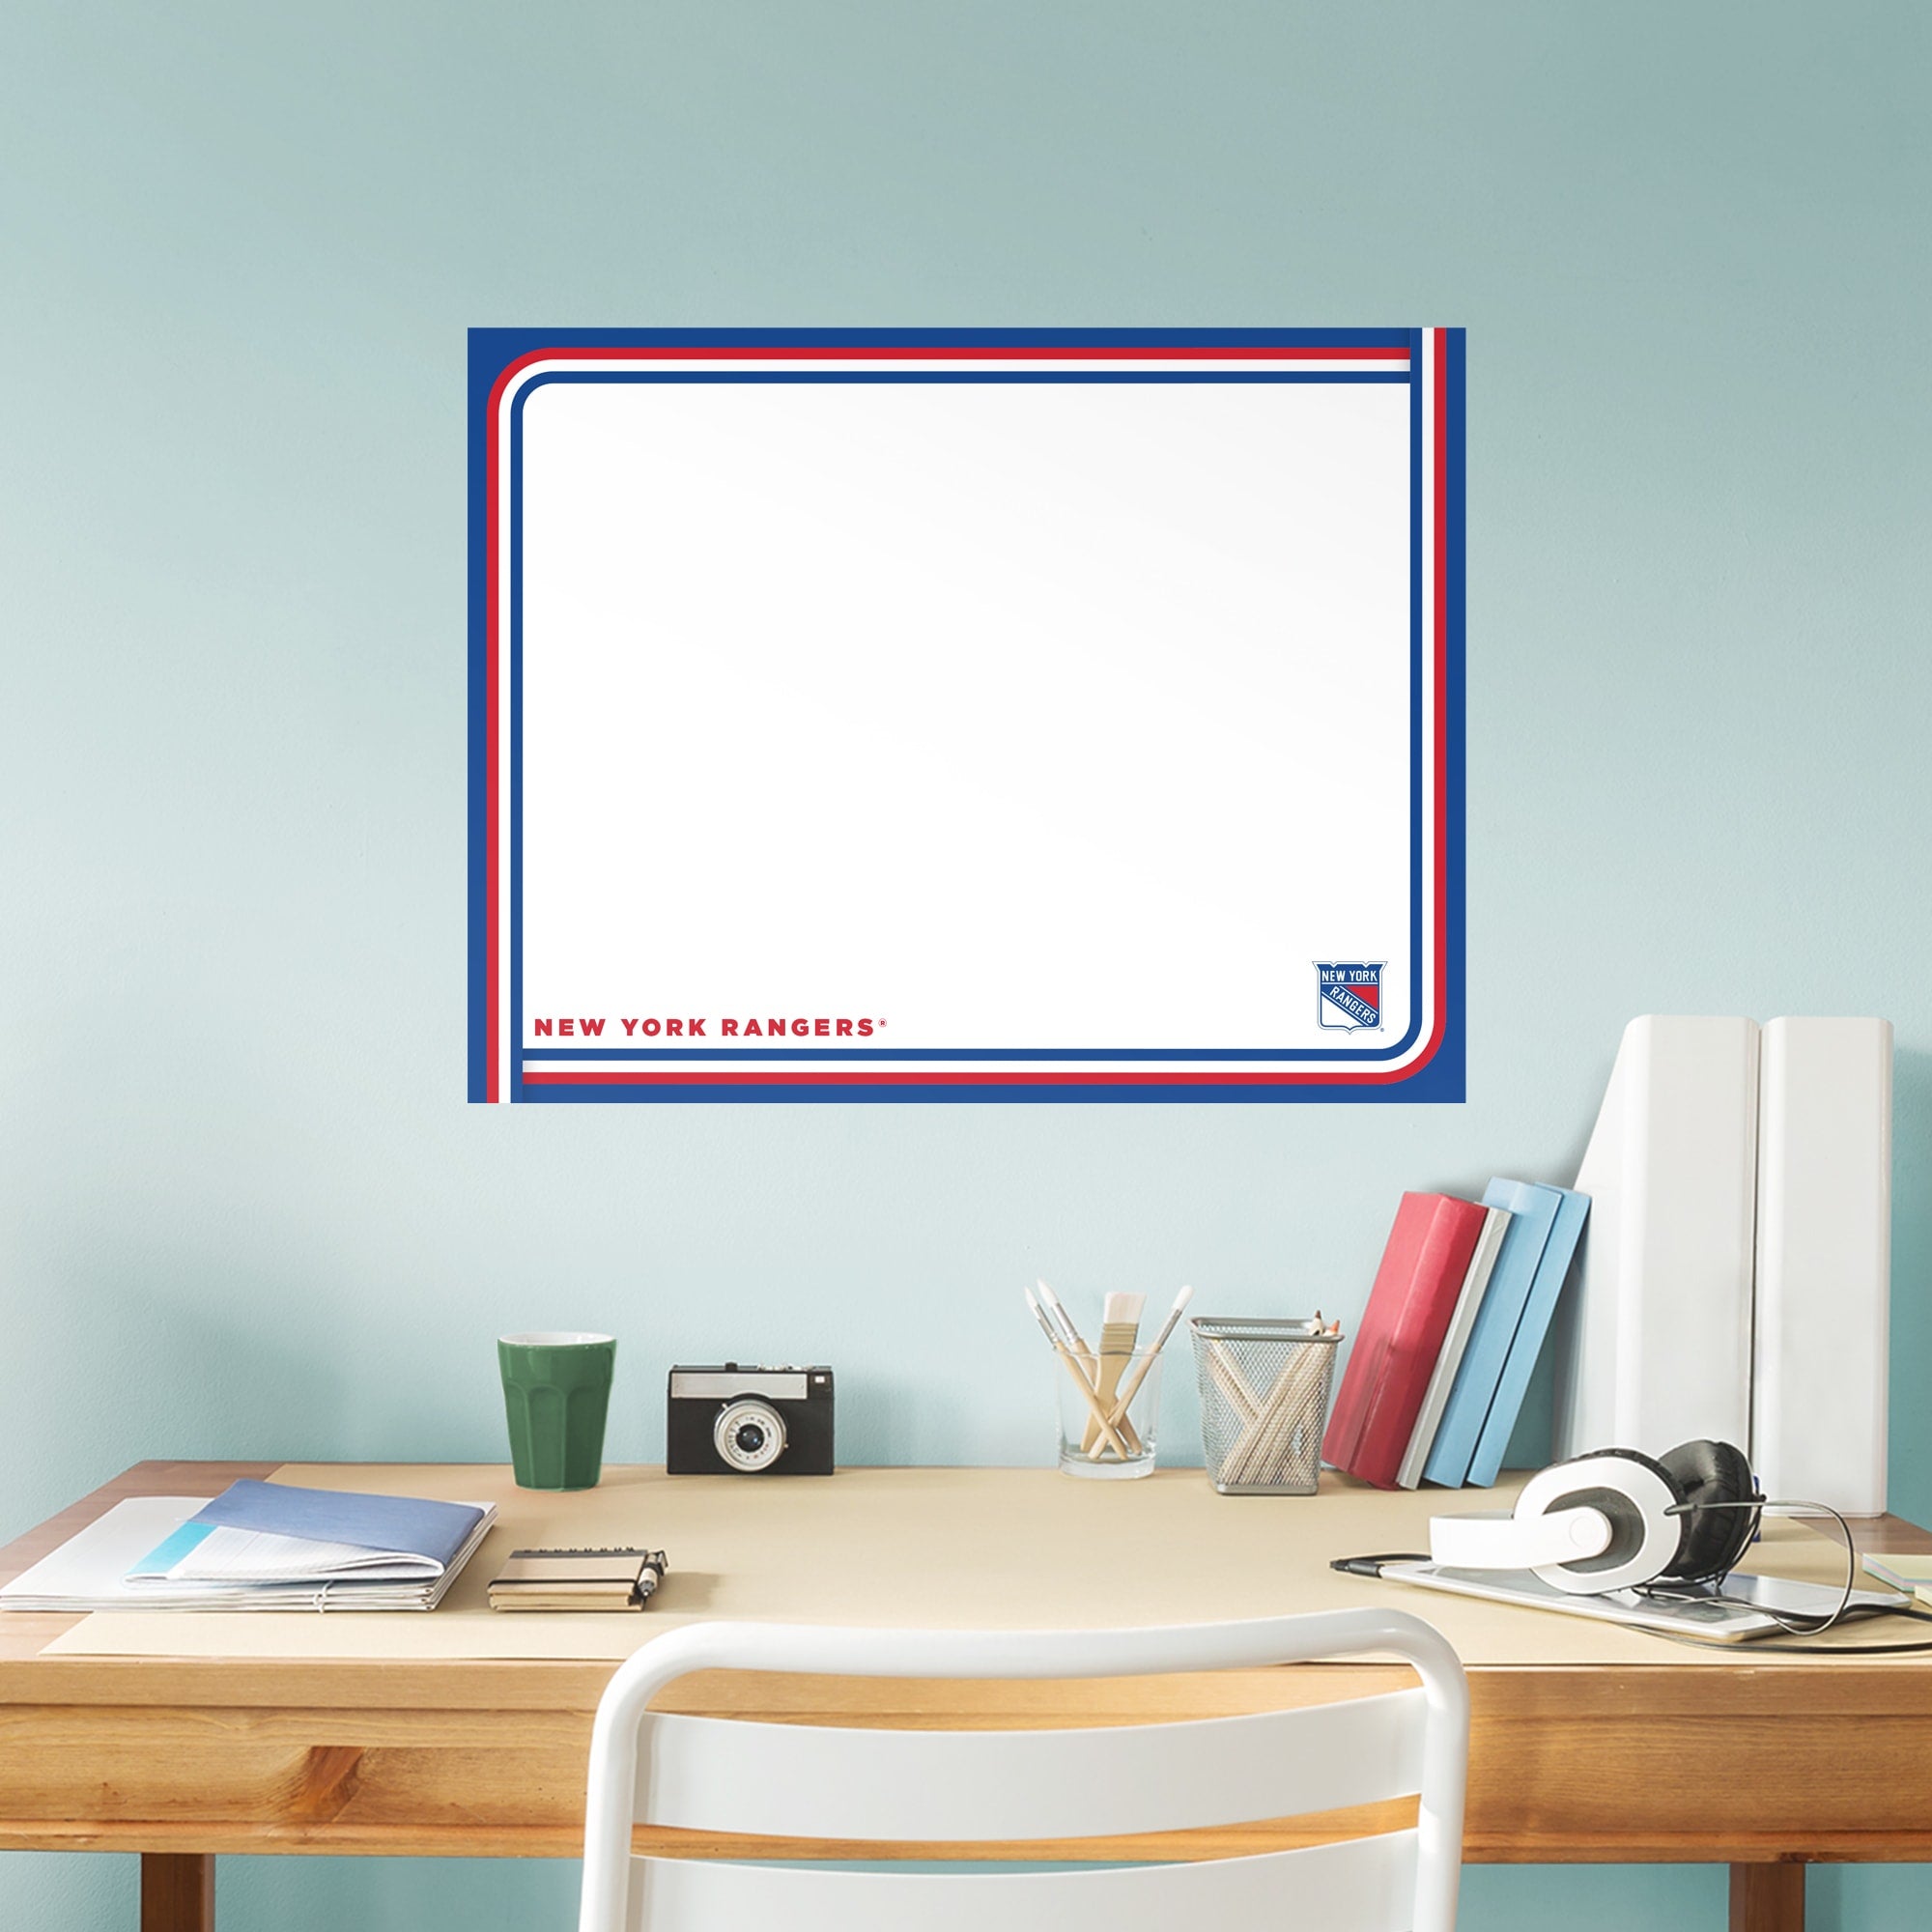 New York Rangers: Dry Erase Whiteboard - X-Large Officially Licensed NHL Removable Wall Decal XL by Fathead | Vinyl